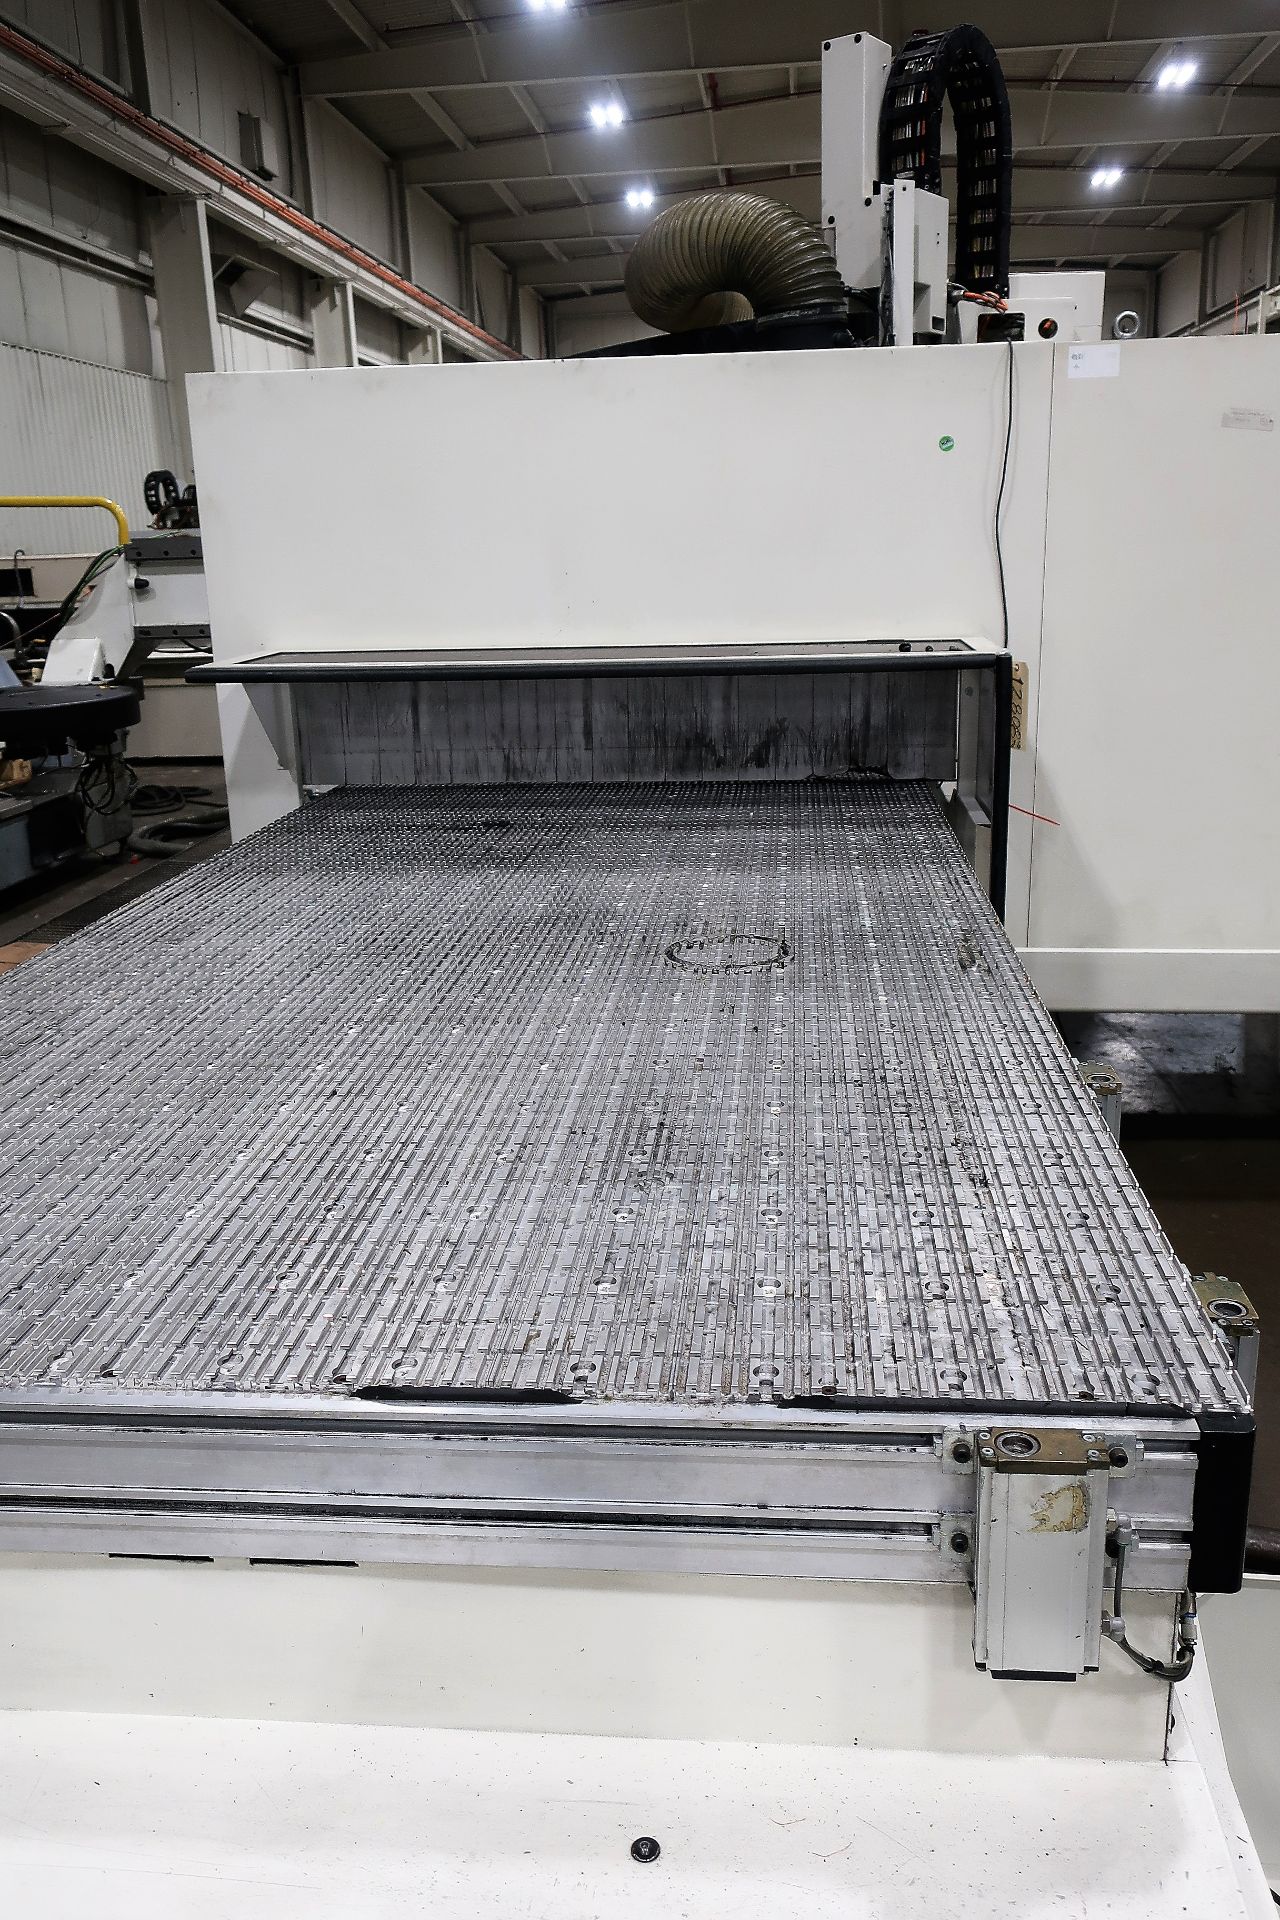 12'x54" SCM ACCORD FX-M 3-AXIS CNC ROUTER, S/N AA2/002685, NEW 2013 - Image 8 of 11